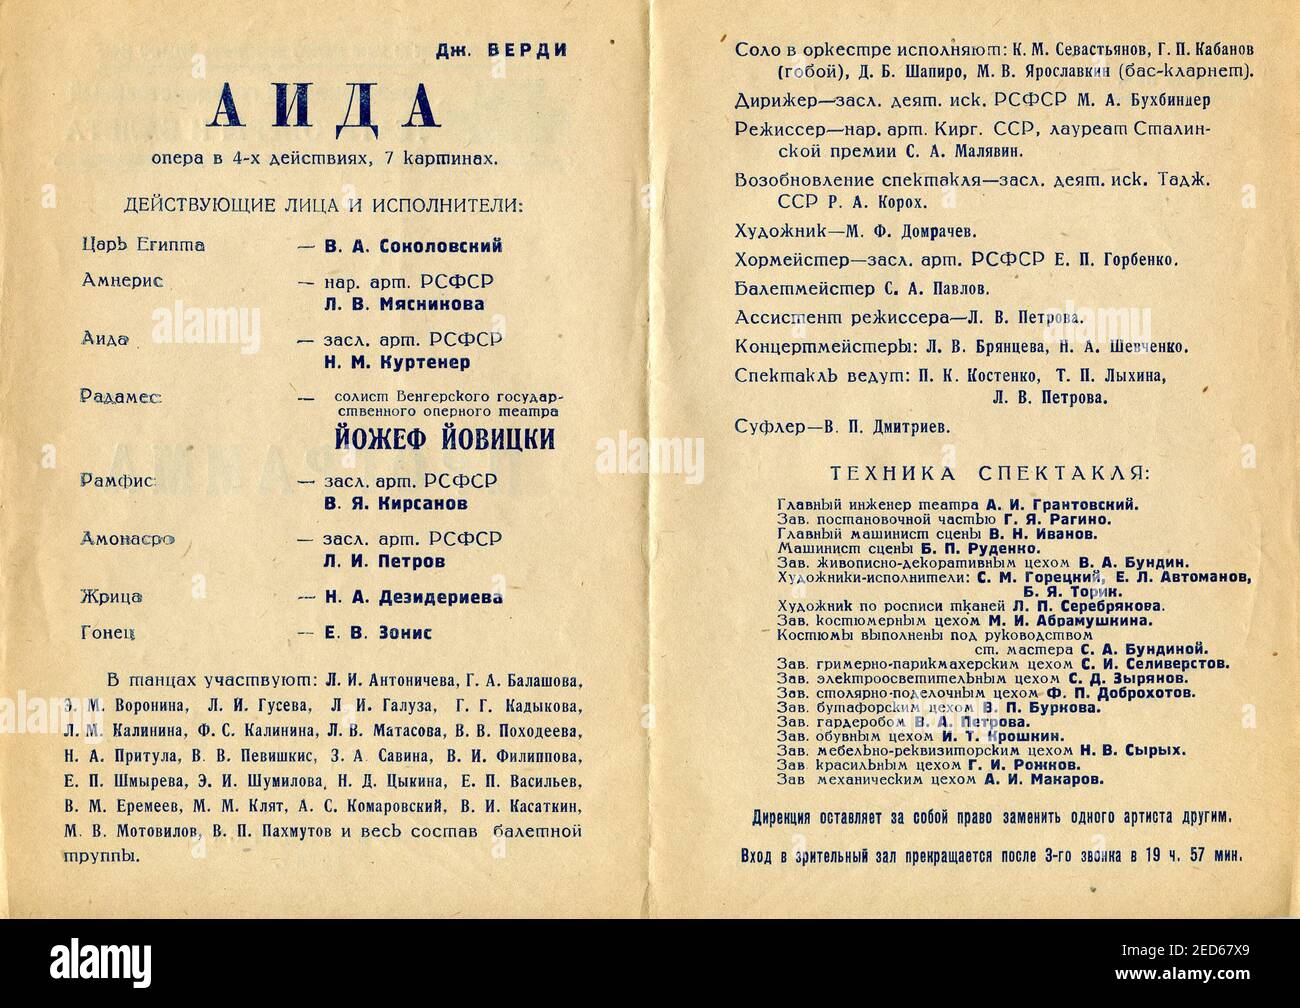 The Concert program for 1955 Novosibirsk Opera and Ballet Theater, first published in 1955 in USSR. Stock Photo